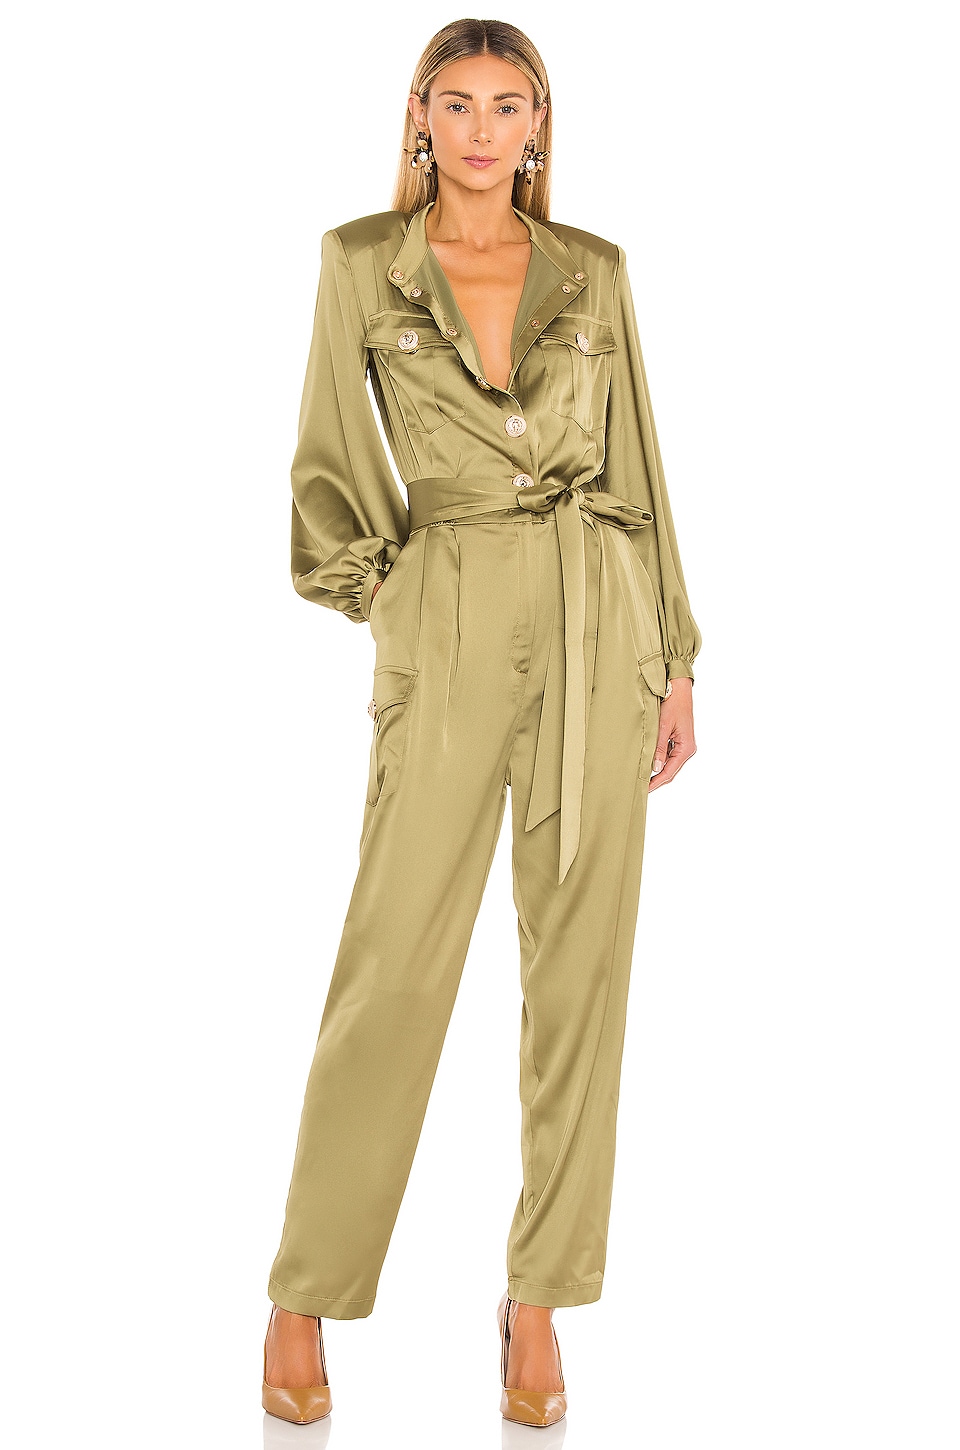 Green Designer Jumpsuit for Evening with Buttons, Tie Waist, Collared Neck, and Long Sleeves